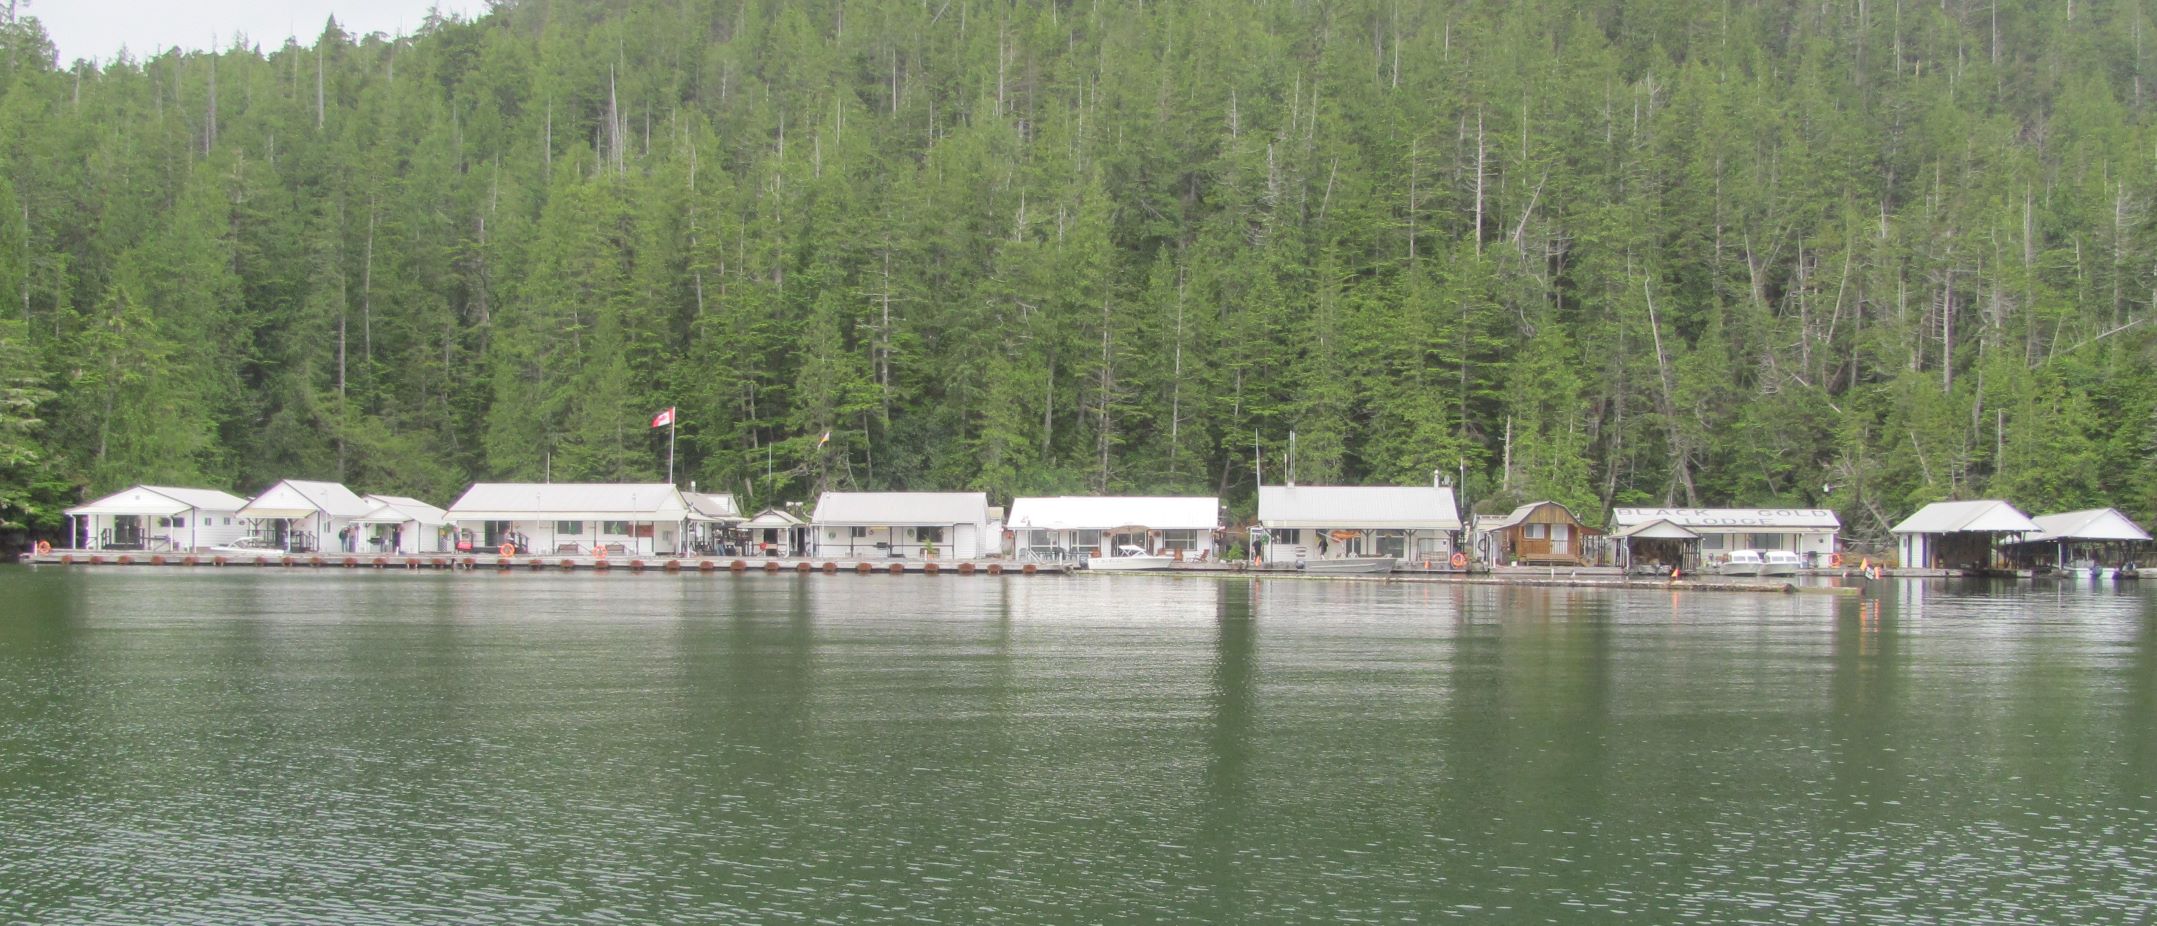 Black Gold is actually a floating village, big logs anchored to shore. It rests in this sheltered cove only during the short July-September fishing season, and is towed to and from winter harbor in between.